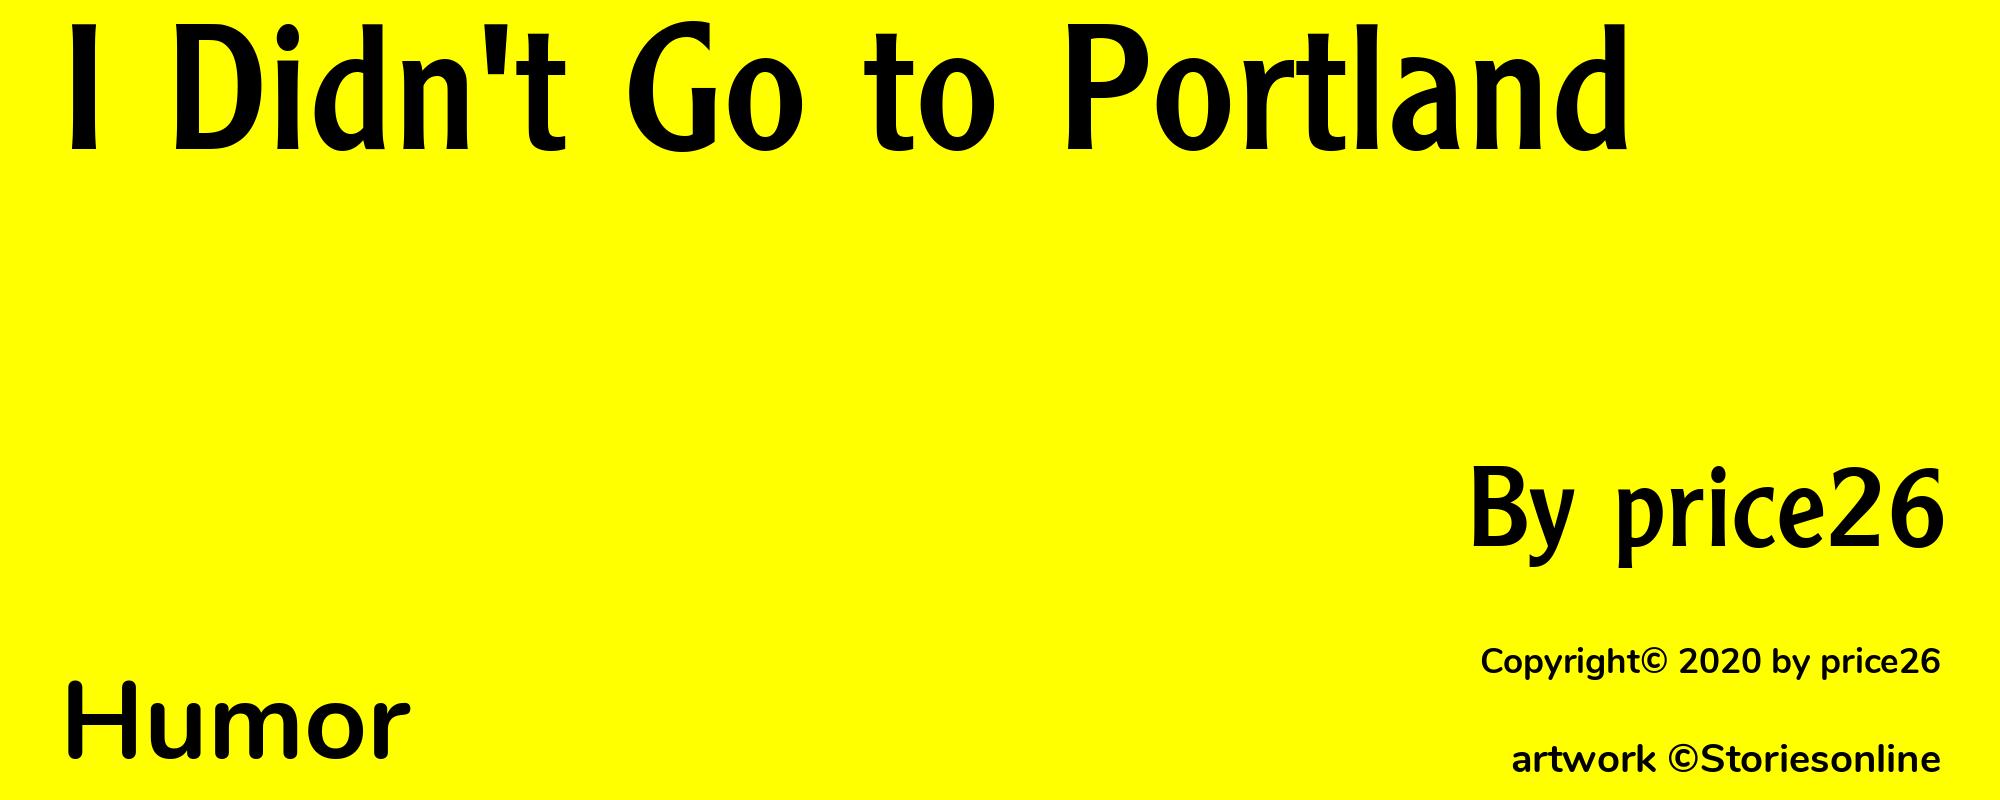 I Didn't Go to Portland - Cover